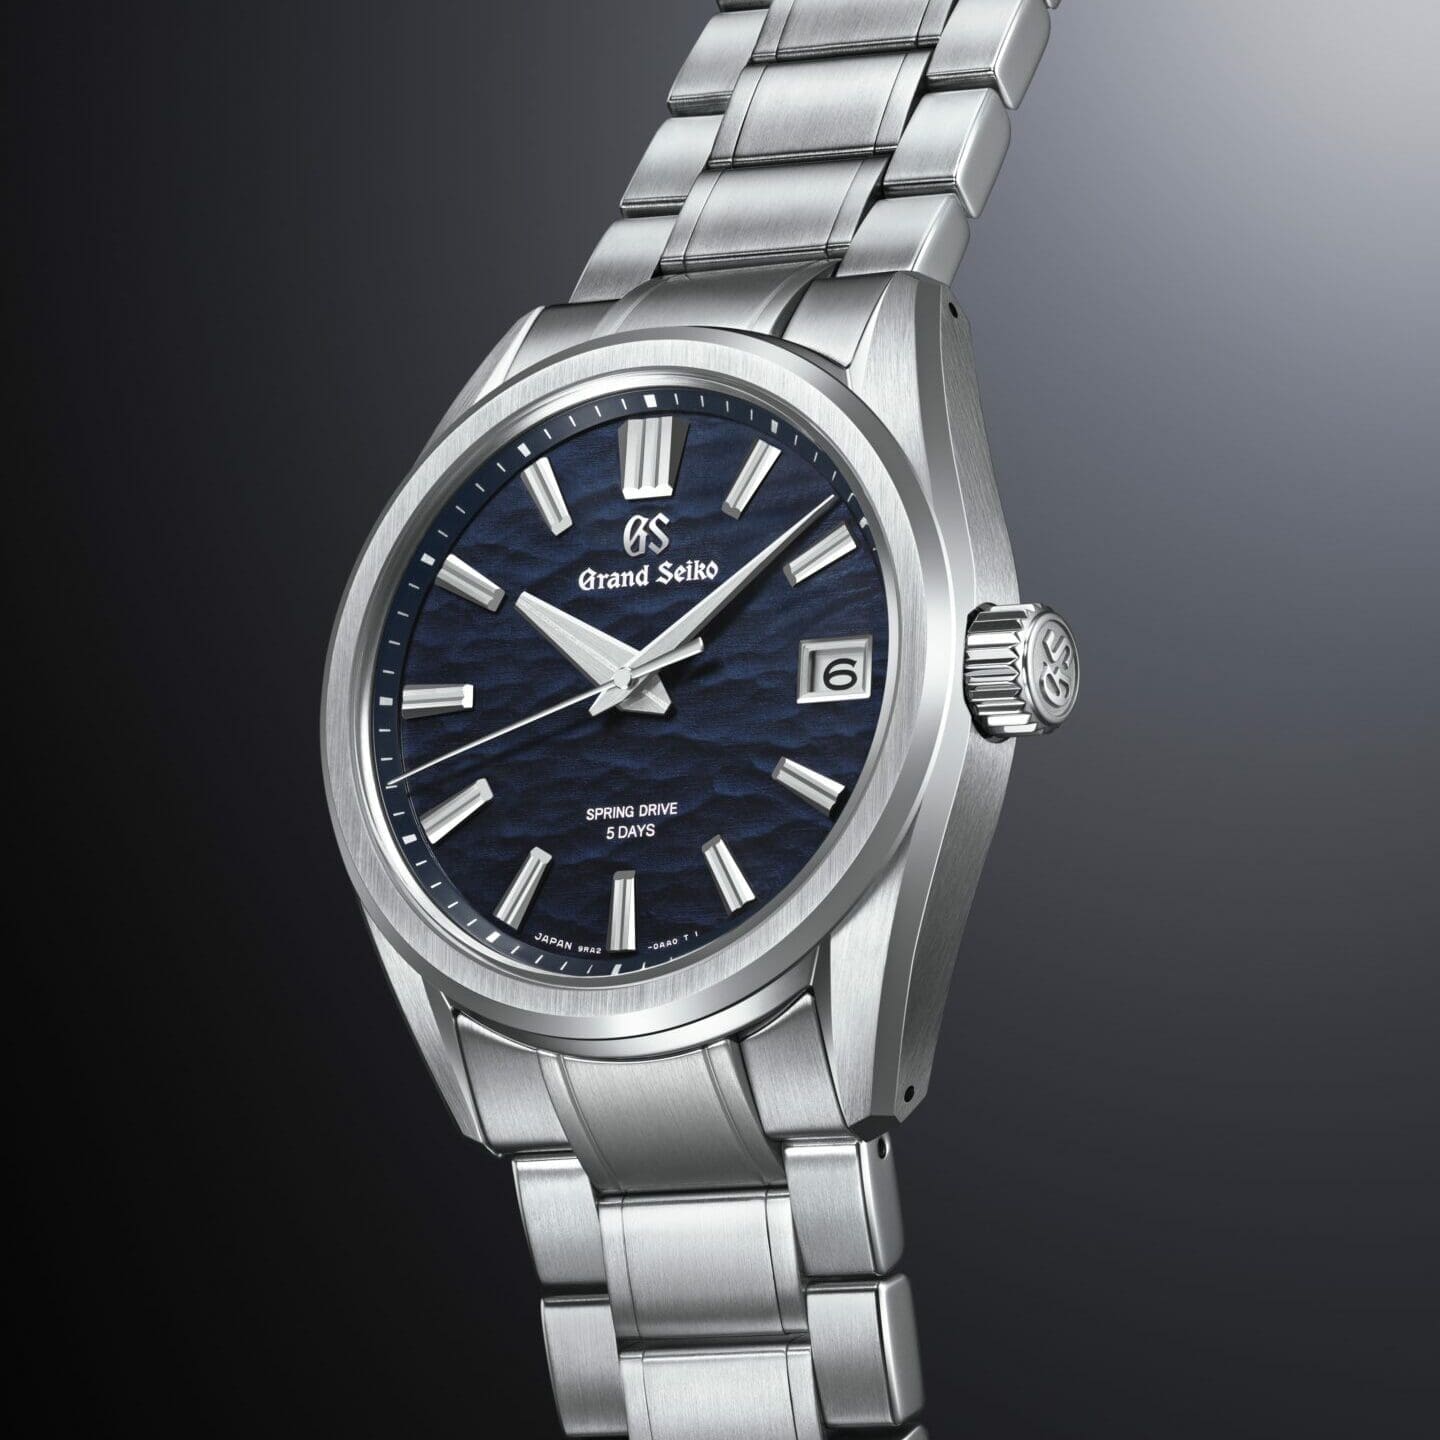 OPINION: I am simultaneously fawning over, yet frustrated with, the new Grand Seiko SLGA021